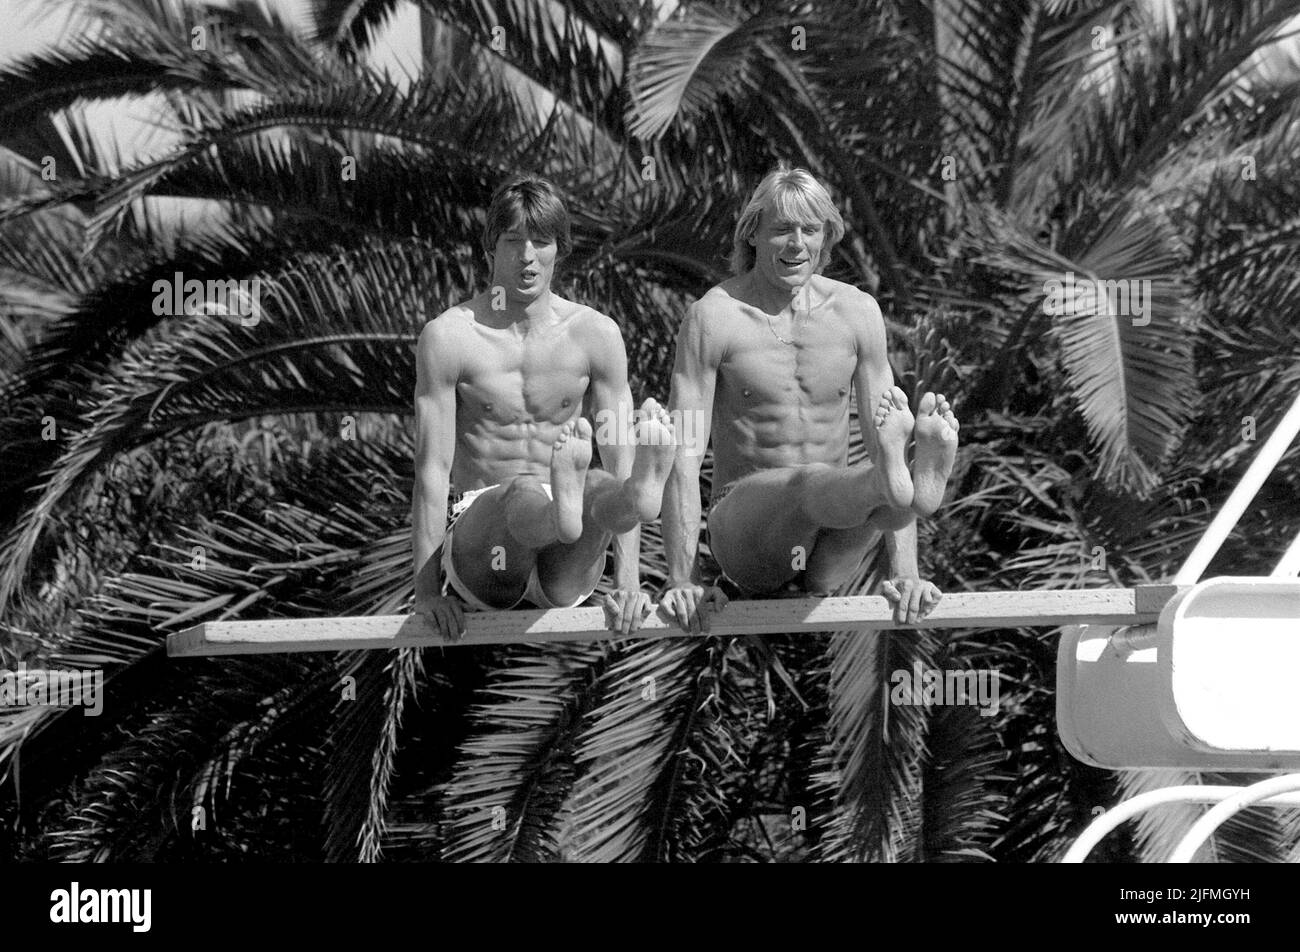 ARCHIVE PHOTO: Carlo THRAENHARDT will be 65 years old on July 5, 2022, Dietmar MOEGENBURG (left) and Carlo THRAENHARDT, Germany, high jumper, high jump, private, sit in forearm supports on a springboard at the swimming pool, at the high jumper training camp in Estepona Spain, 24.03. 1984, B/W recording. Stock Photo